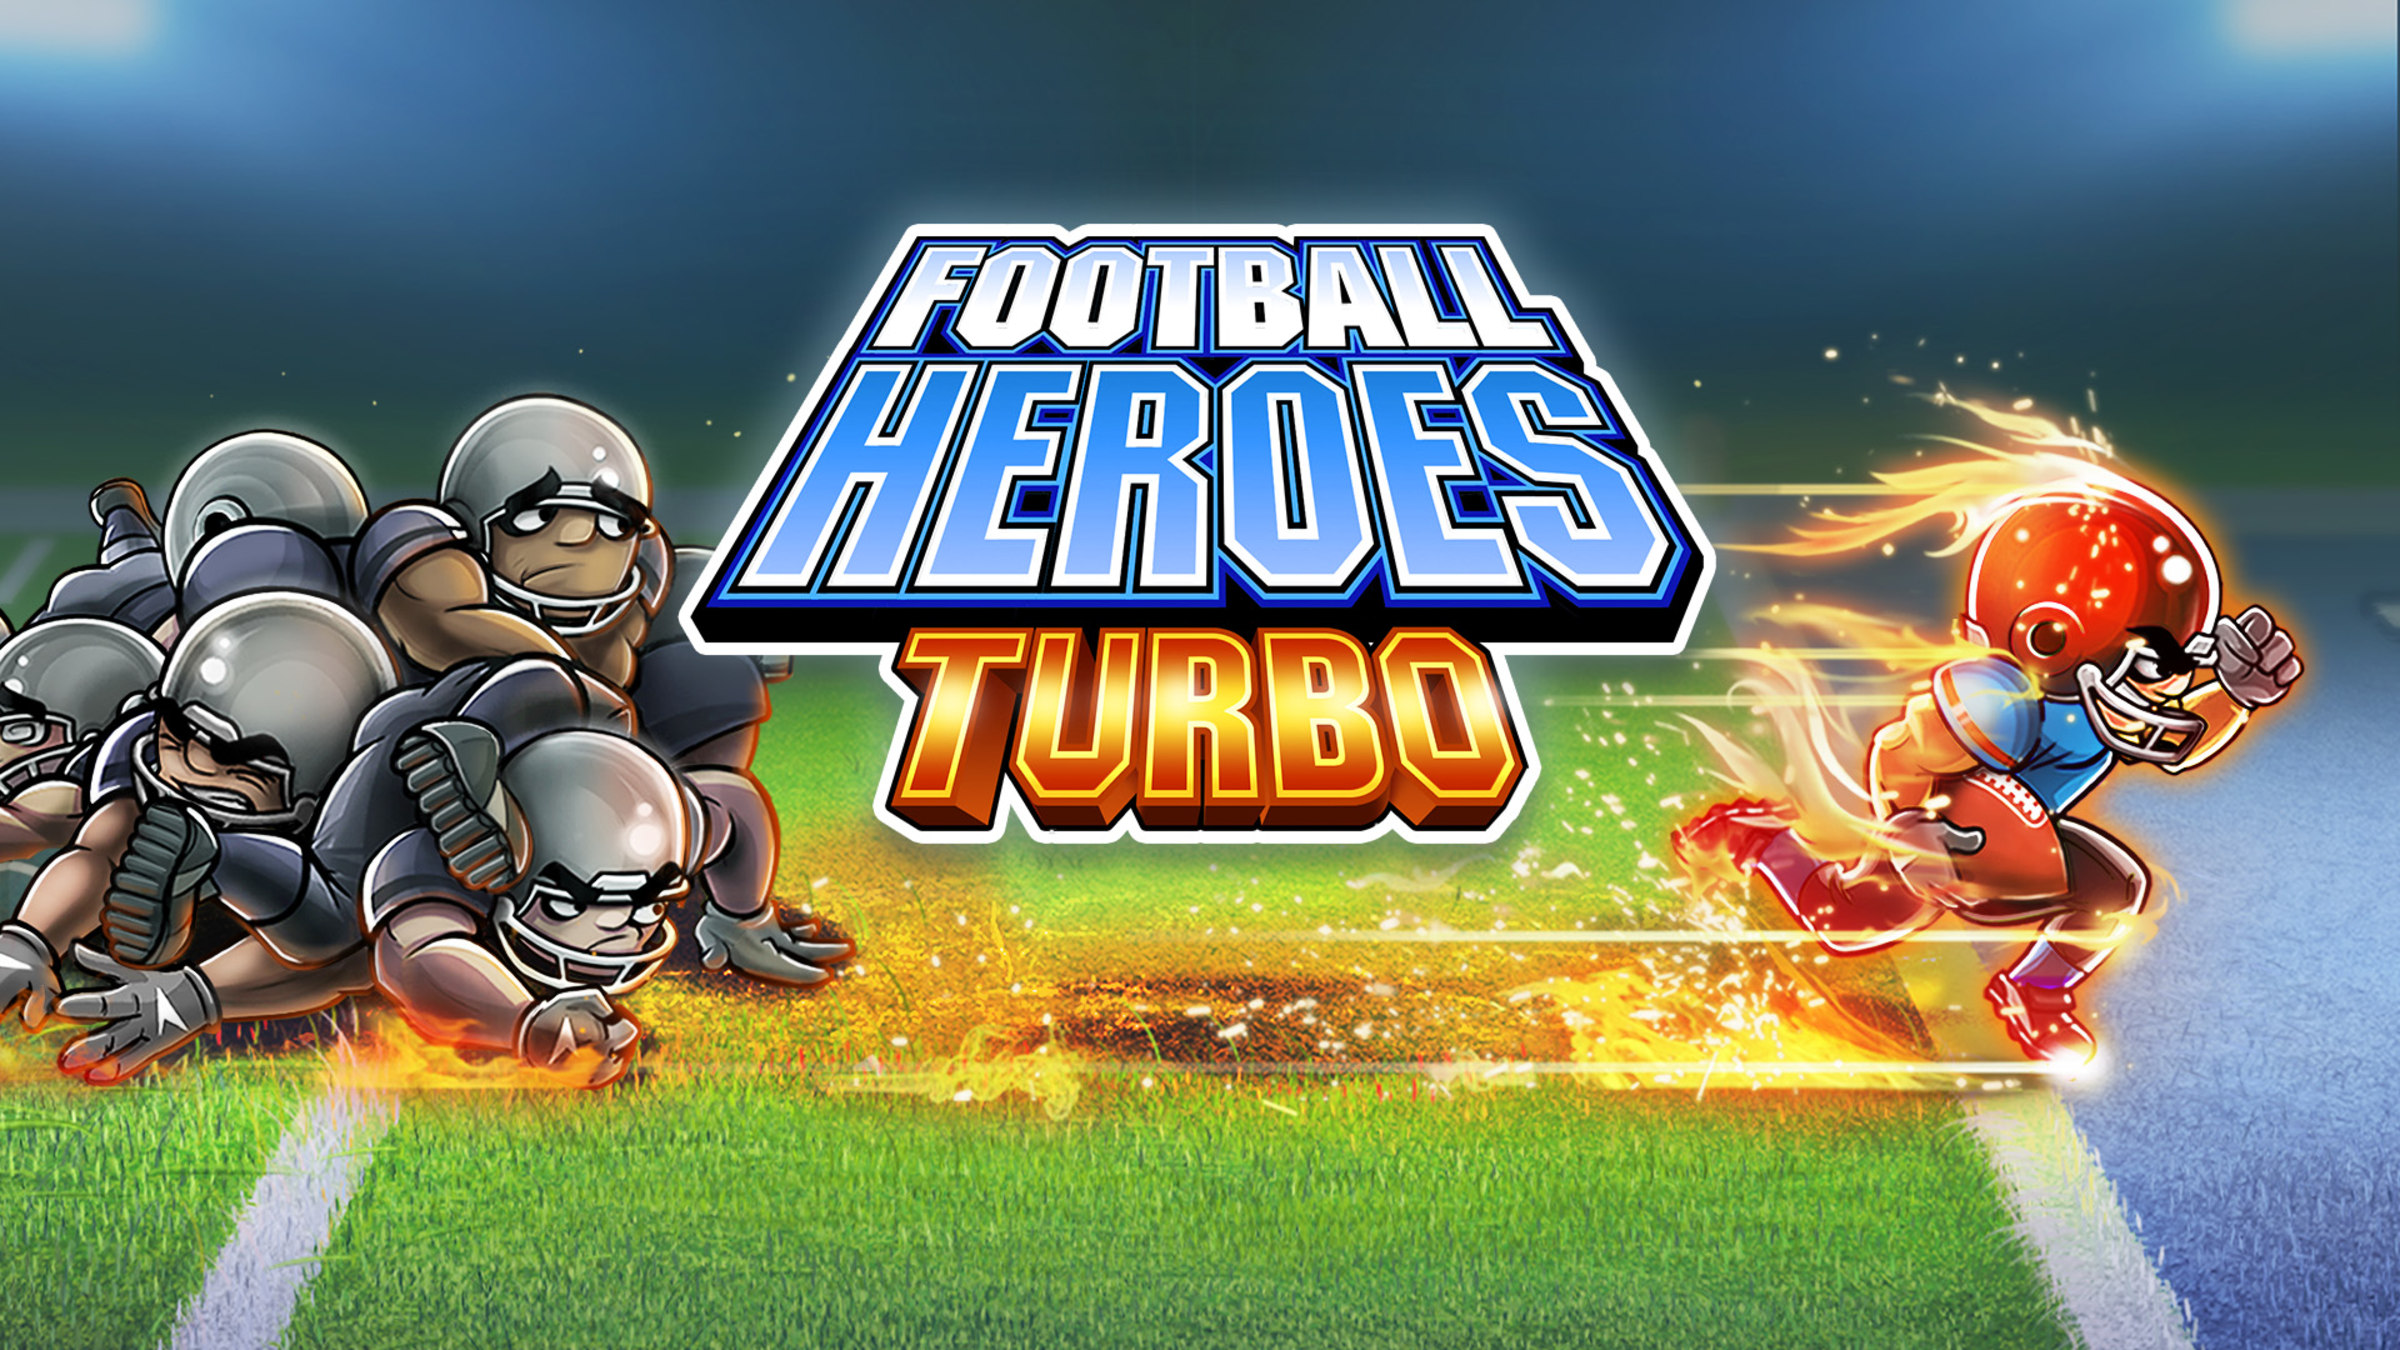 Football Heroes Turbo for Nintendo Switch